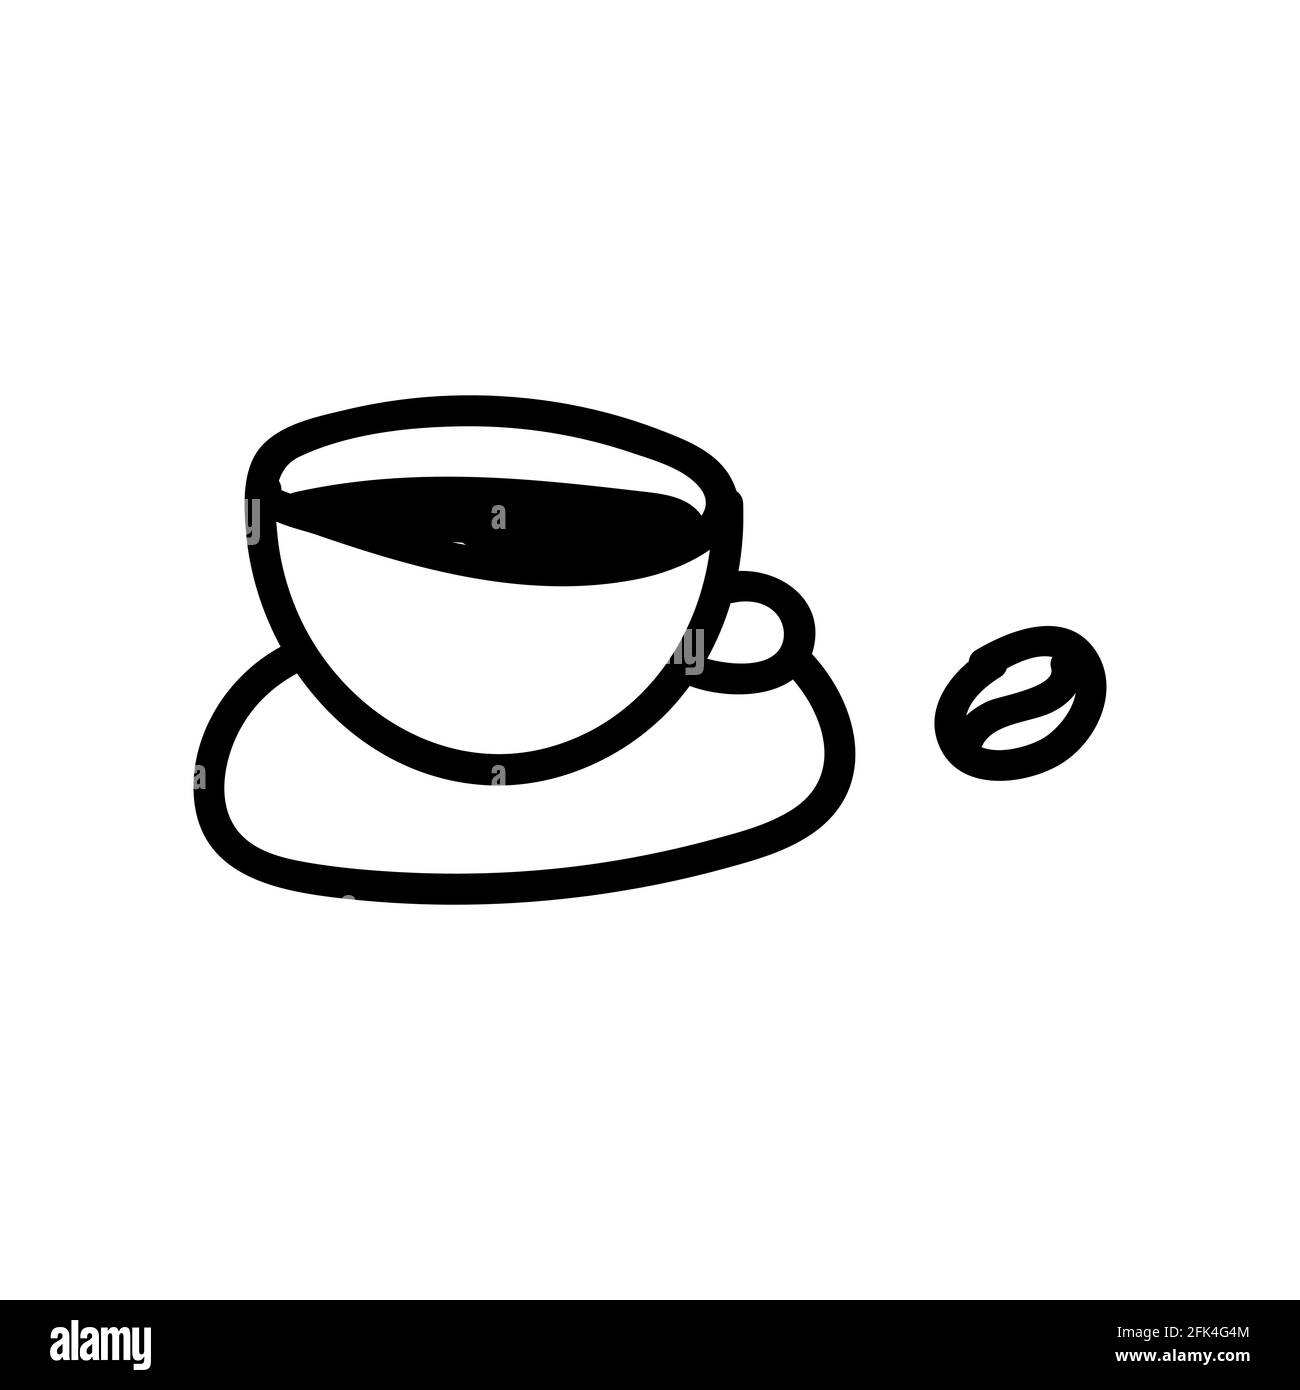 Cup of coffee with bean. Hand drawn doodle vector illustration isolated on whithe background. Simple drawings with black color. Stock Vector